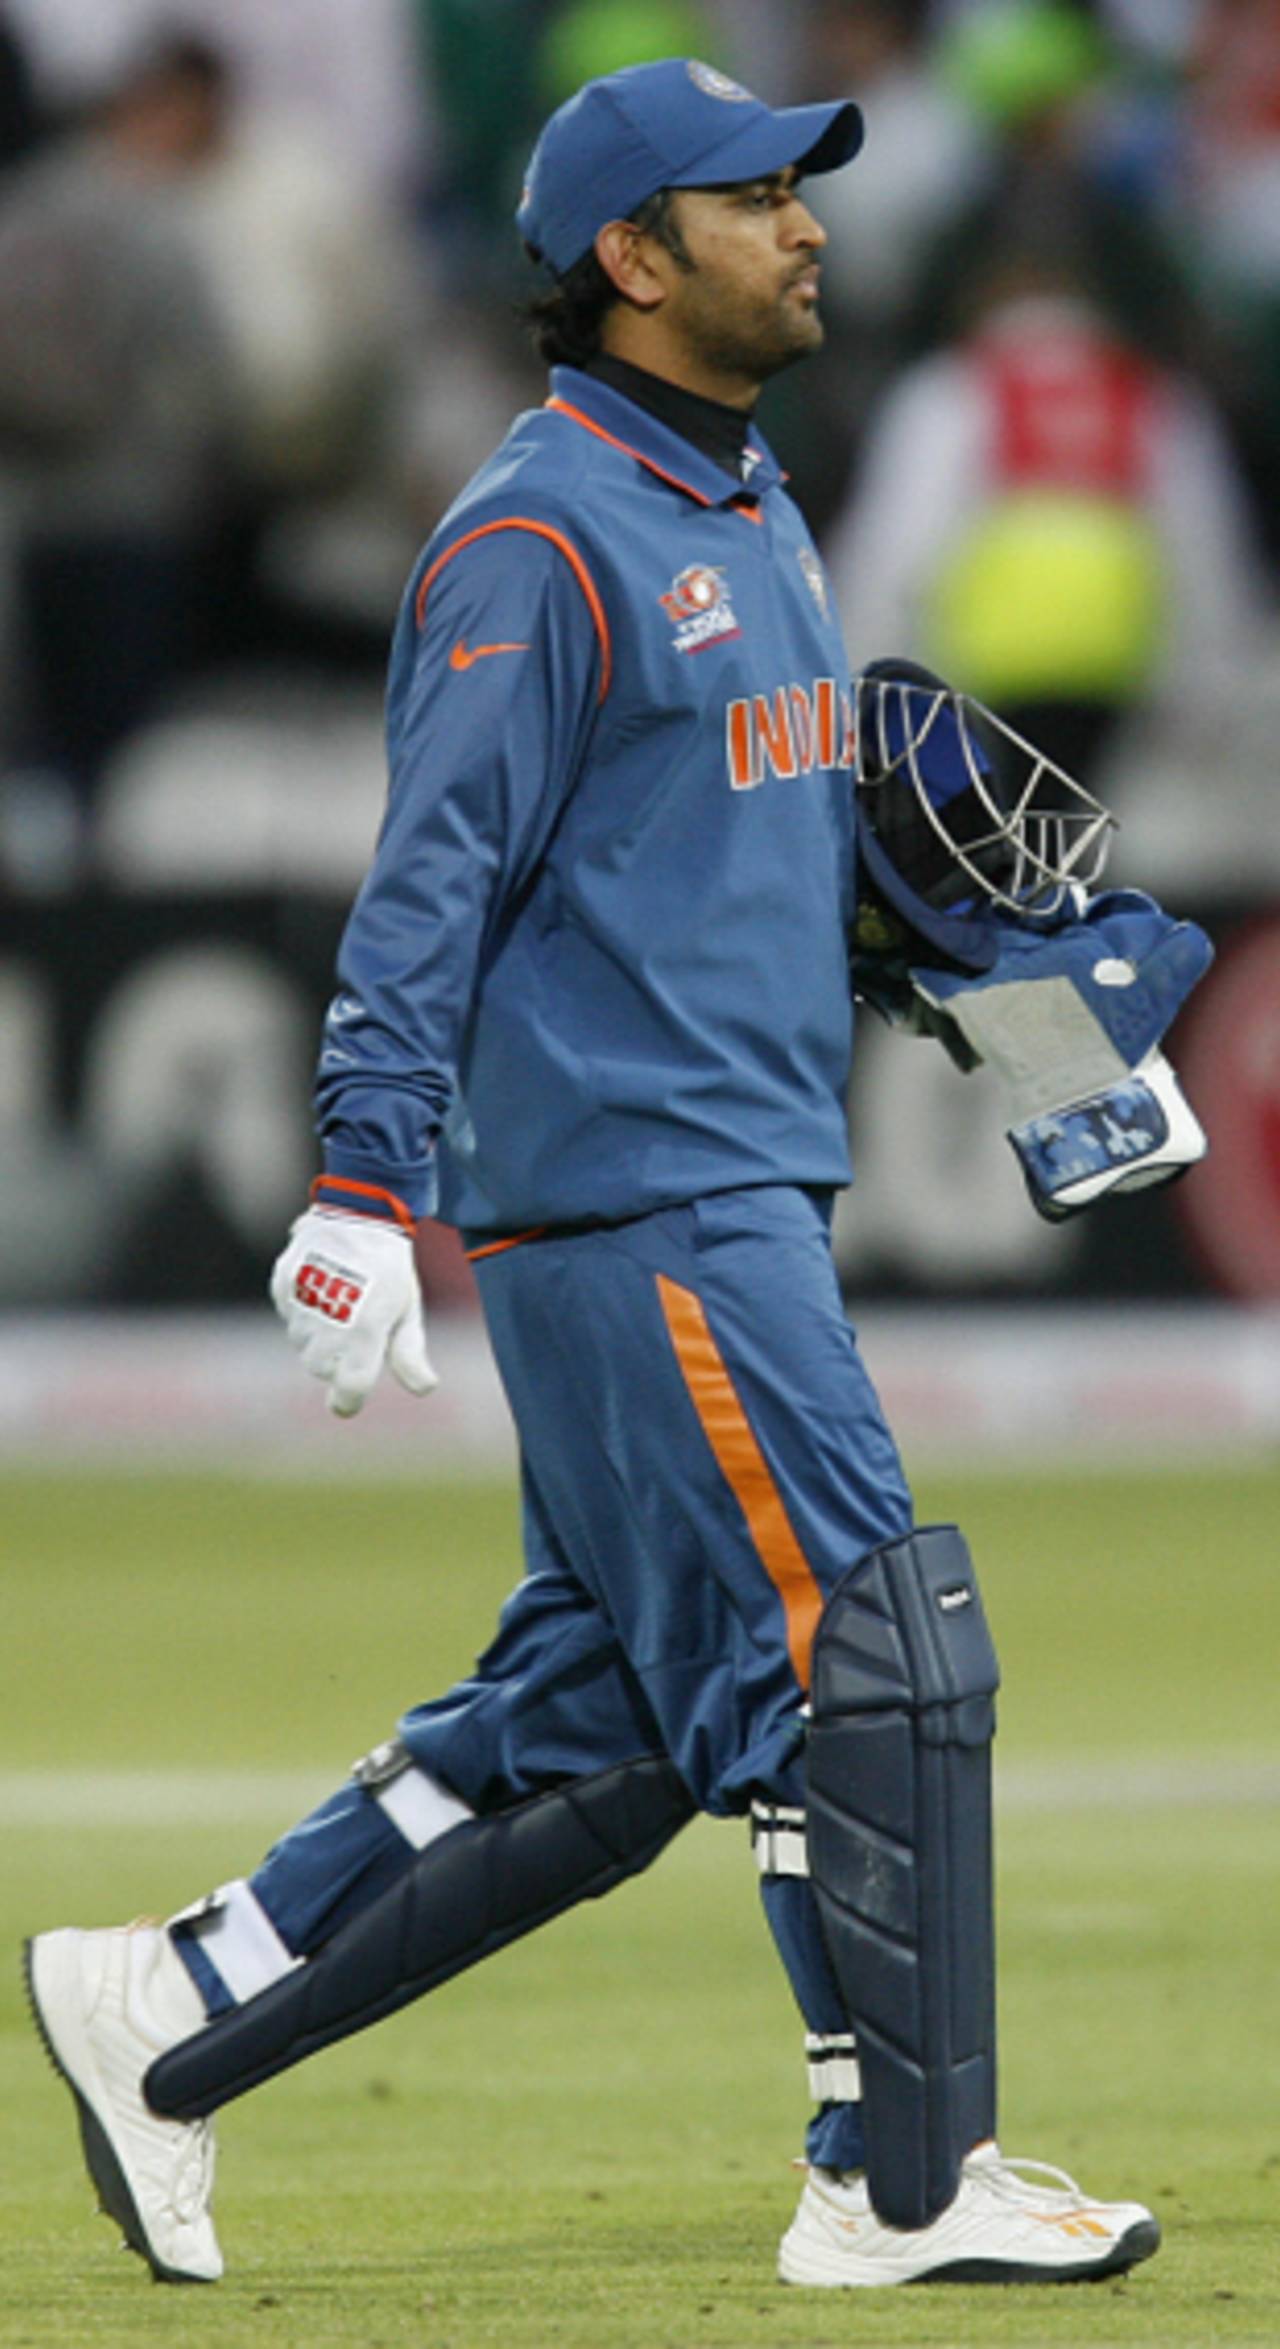 A disappointing day for MS Dhoni, India v West Indies, ICC World Twenty20 Super Eights, Lord's, June 12, 2009